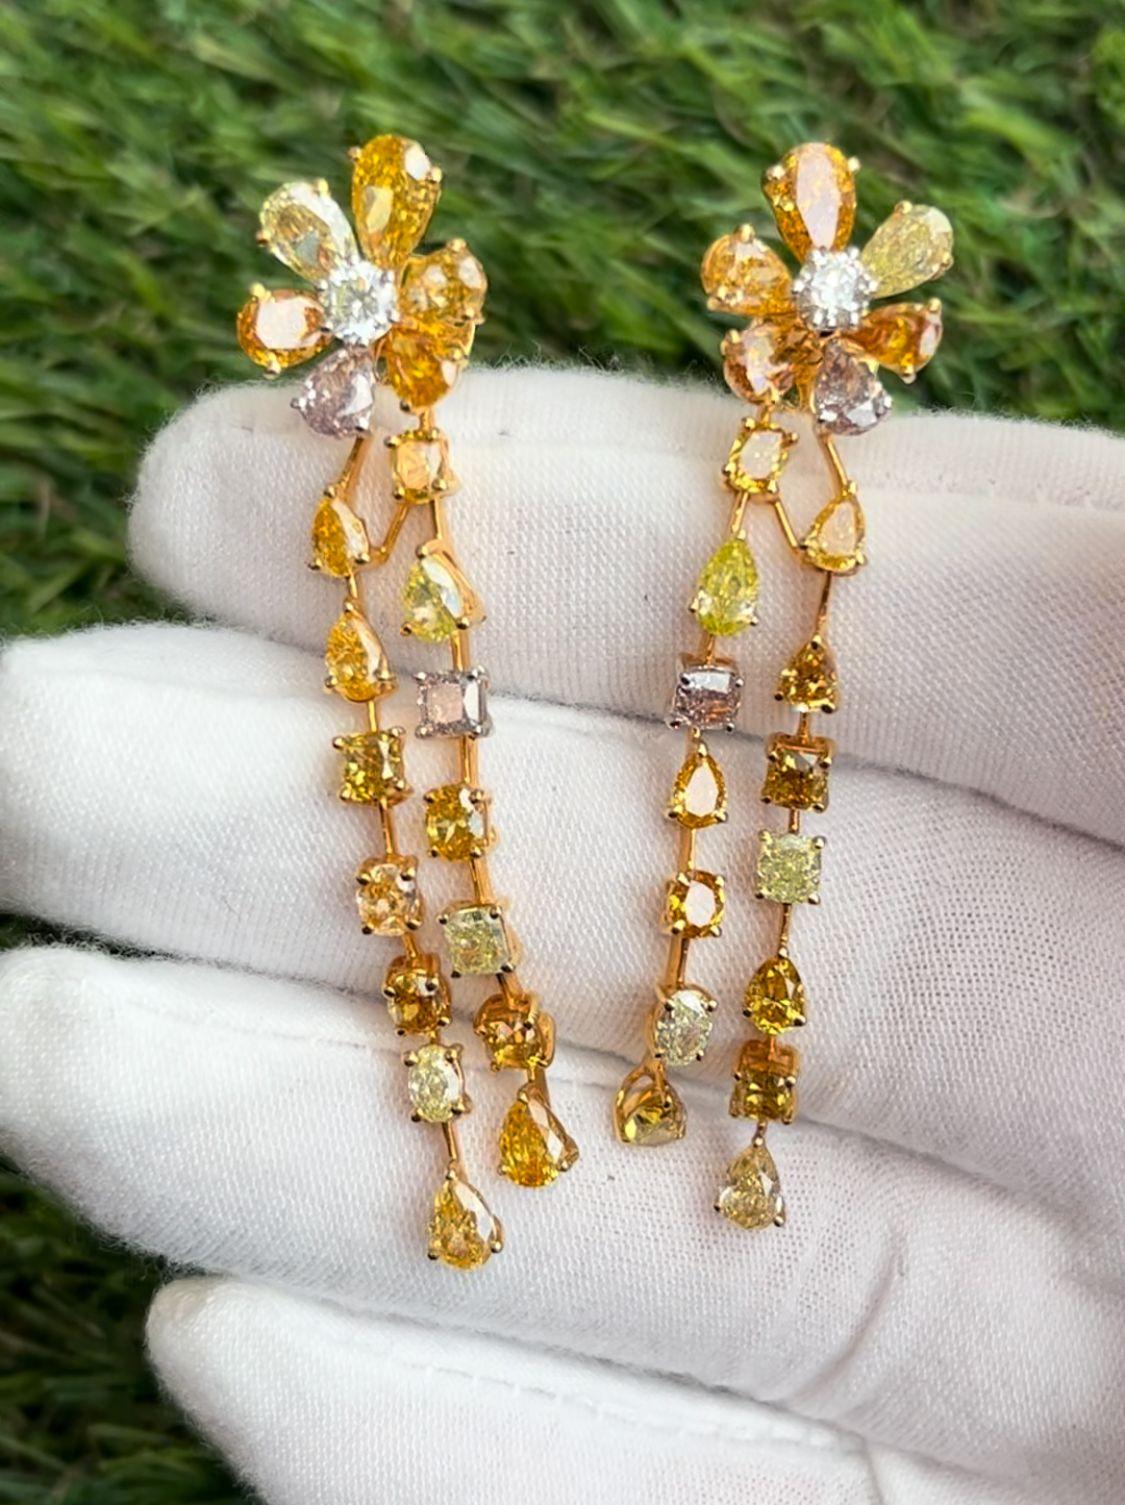 These one-of-a-kind natural fancy color diamond earrings are dripping in elegance.

14.27 Carats Total of Orange, Yellow, Pink, Green fancy color diamonds in a variety of shapes.

The earrings contain a total of 42 natural fancy color diamonds & an